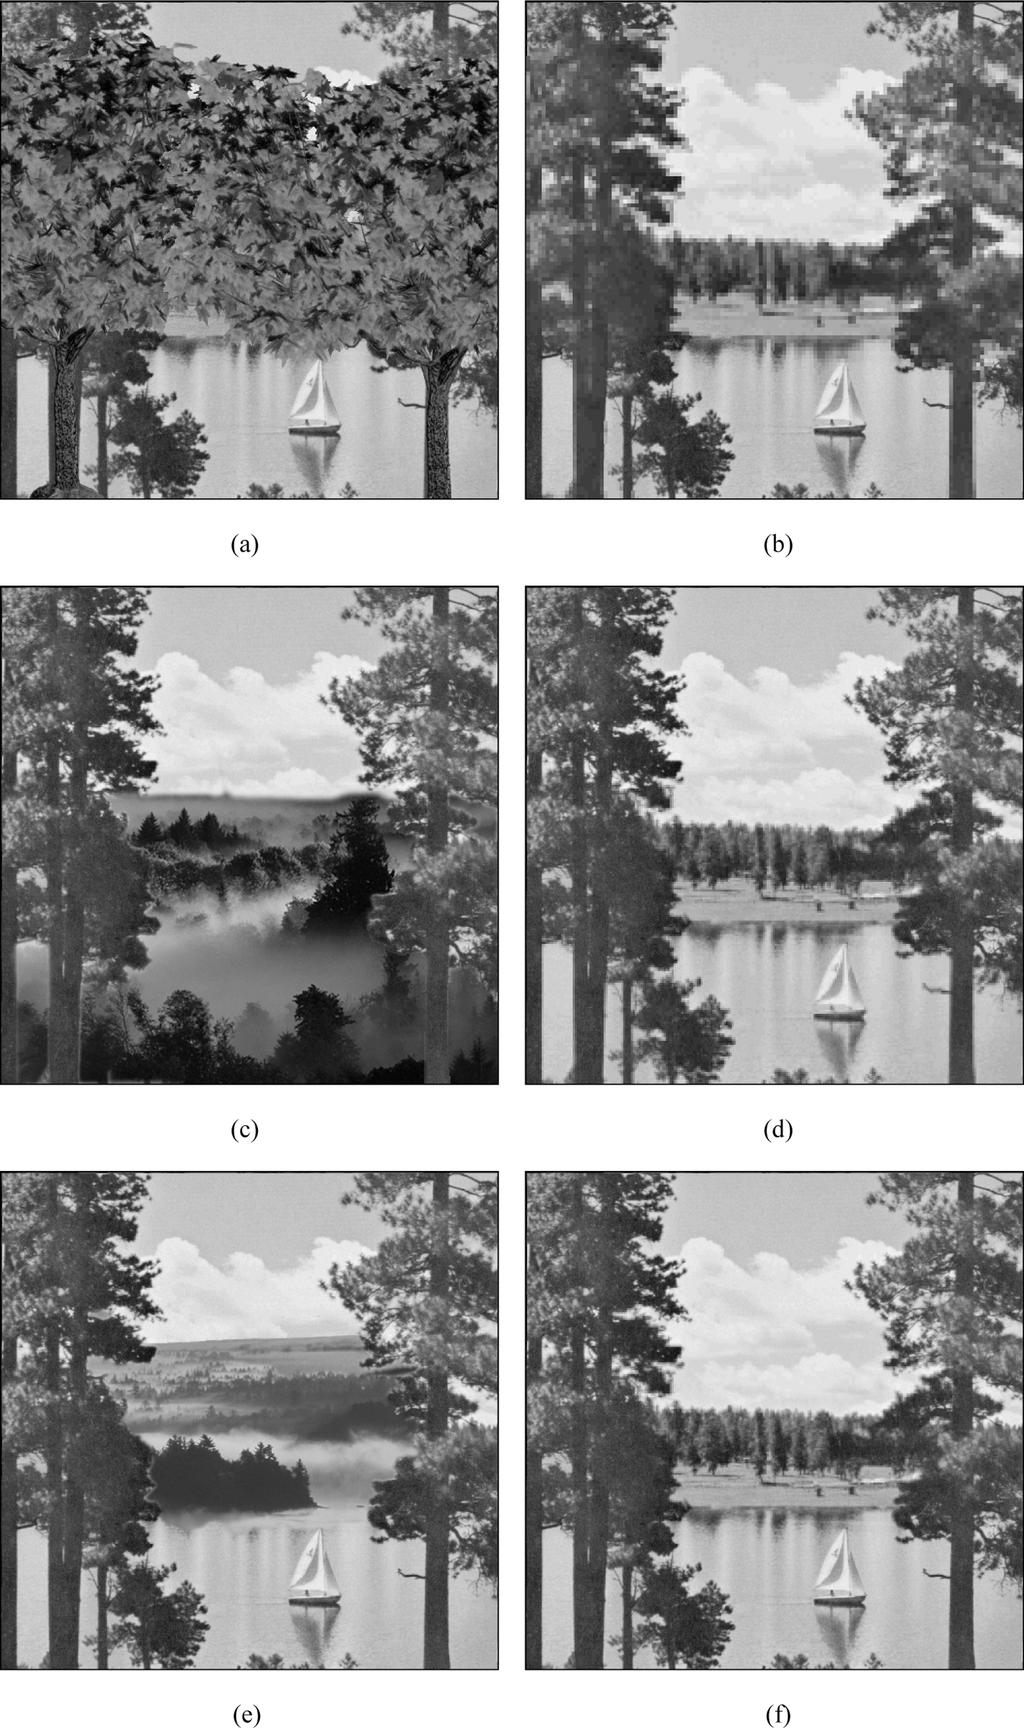 ZHANG et al: REFERENCE SHARING MECHANISM FOR WATERMARK SELF-EMBEDDING = 64 6 Fig 9 (a) Tampered Lake with : % (b) Restored version of (a) (c) Tampered Lake with with : % (f) Restored version of (e) =